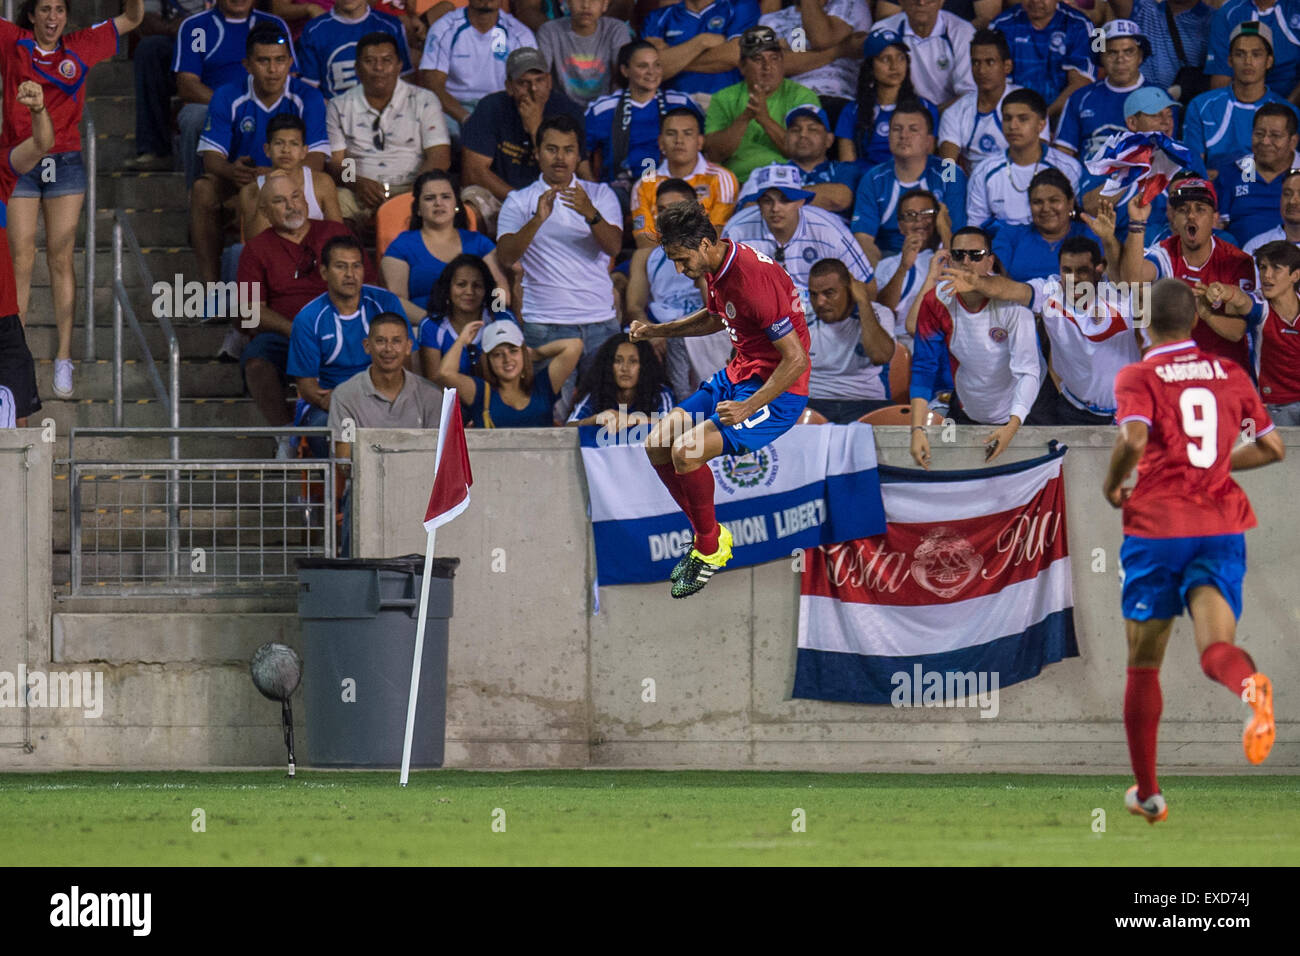 Houston, Texas, USA. 11th July, 2015. Costa Rica midfielder Bryan Ruiz (10) celebrates his goal during the 2nd half of an international CONCACAF Gold Cup soccer match between Costa Rica and El Salvador at BBVA Compass Stadium in Houston, TX. The game ended in a 1-1 draw. Credit:  Cal Sport Media/Alamy Live News Stock Photo